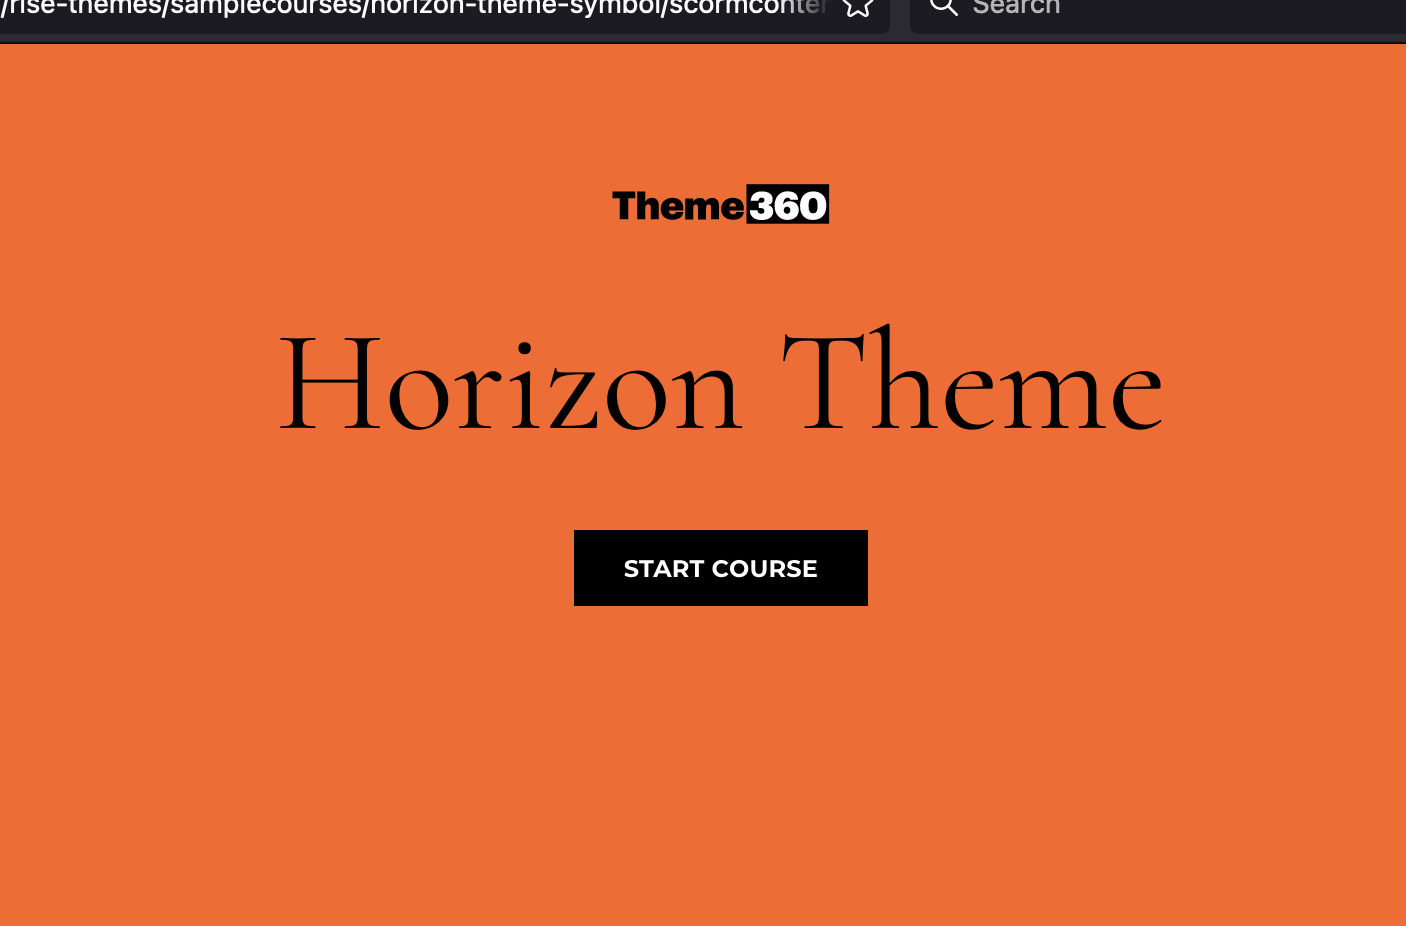 Removing or change the asterisk symbol in the Horizon theme